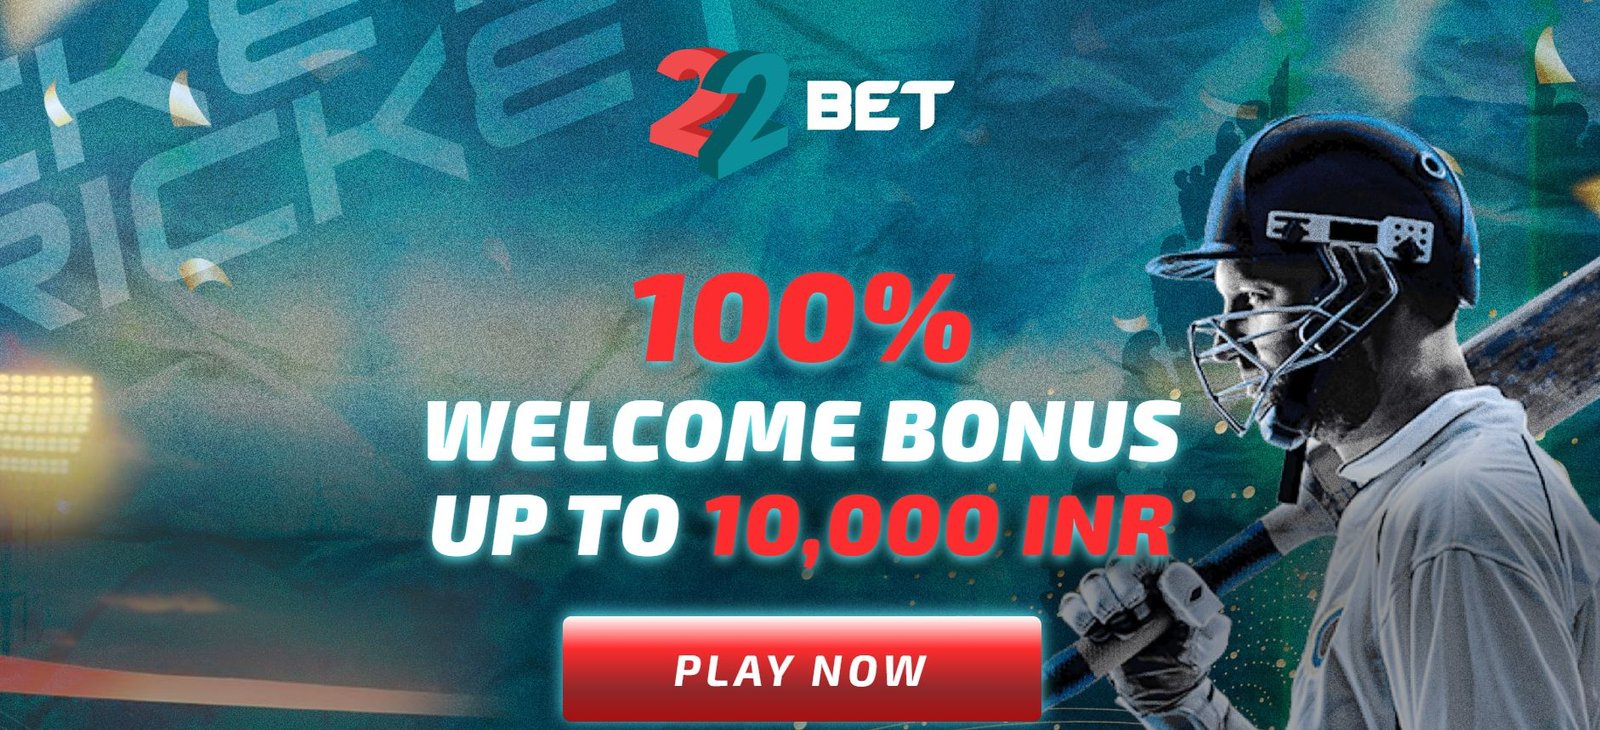 22bet review india